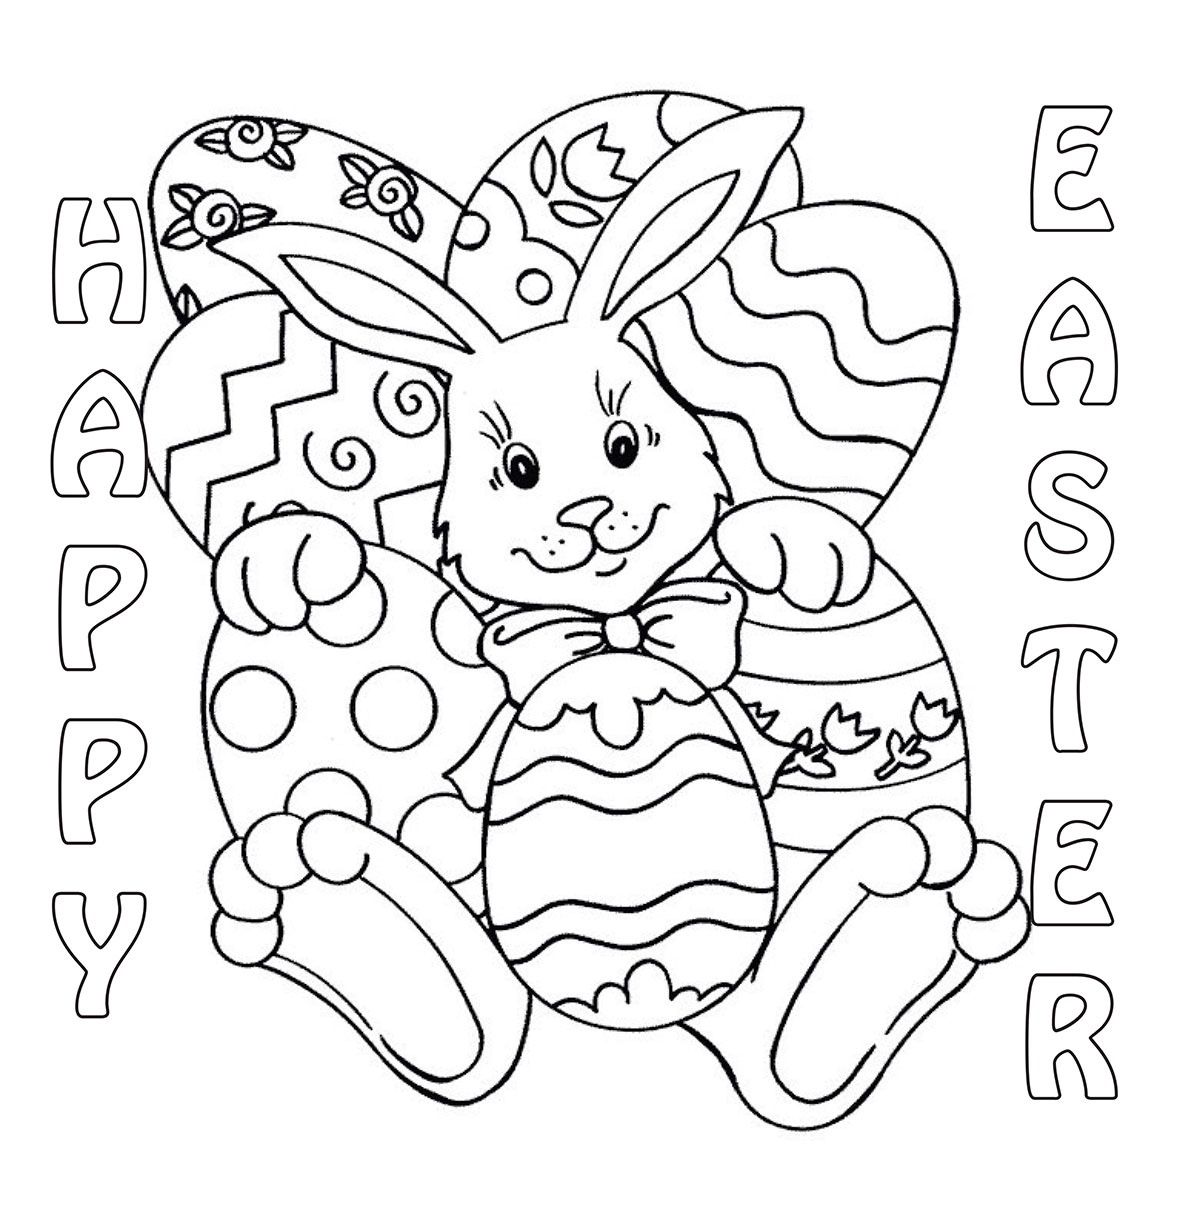 Easter Coloring Sheets Pdf Easter Color Colored Easter Chicks